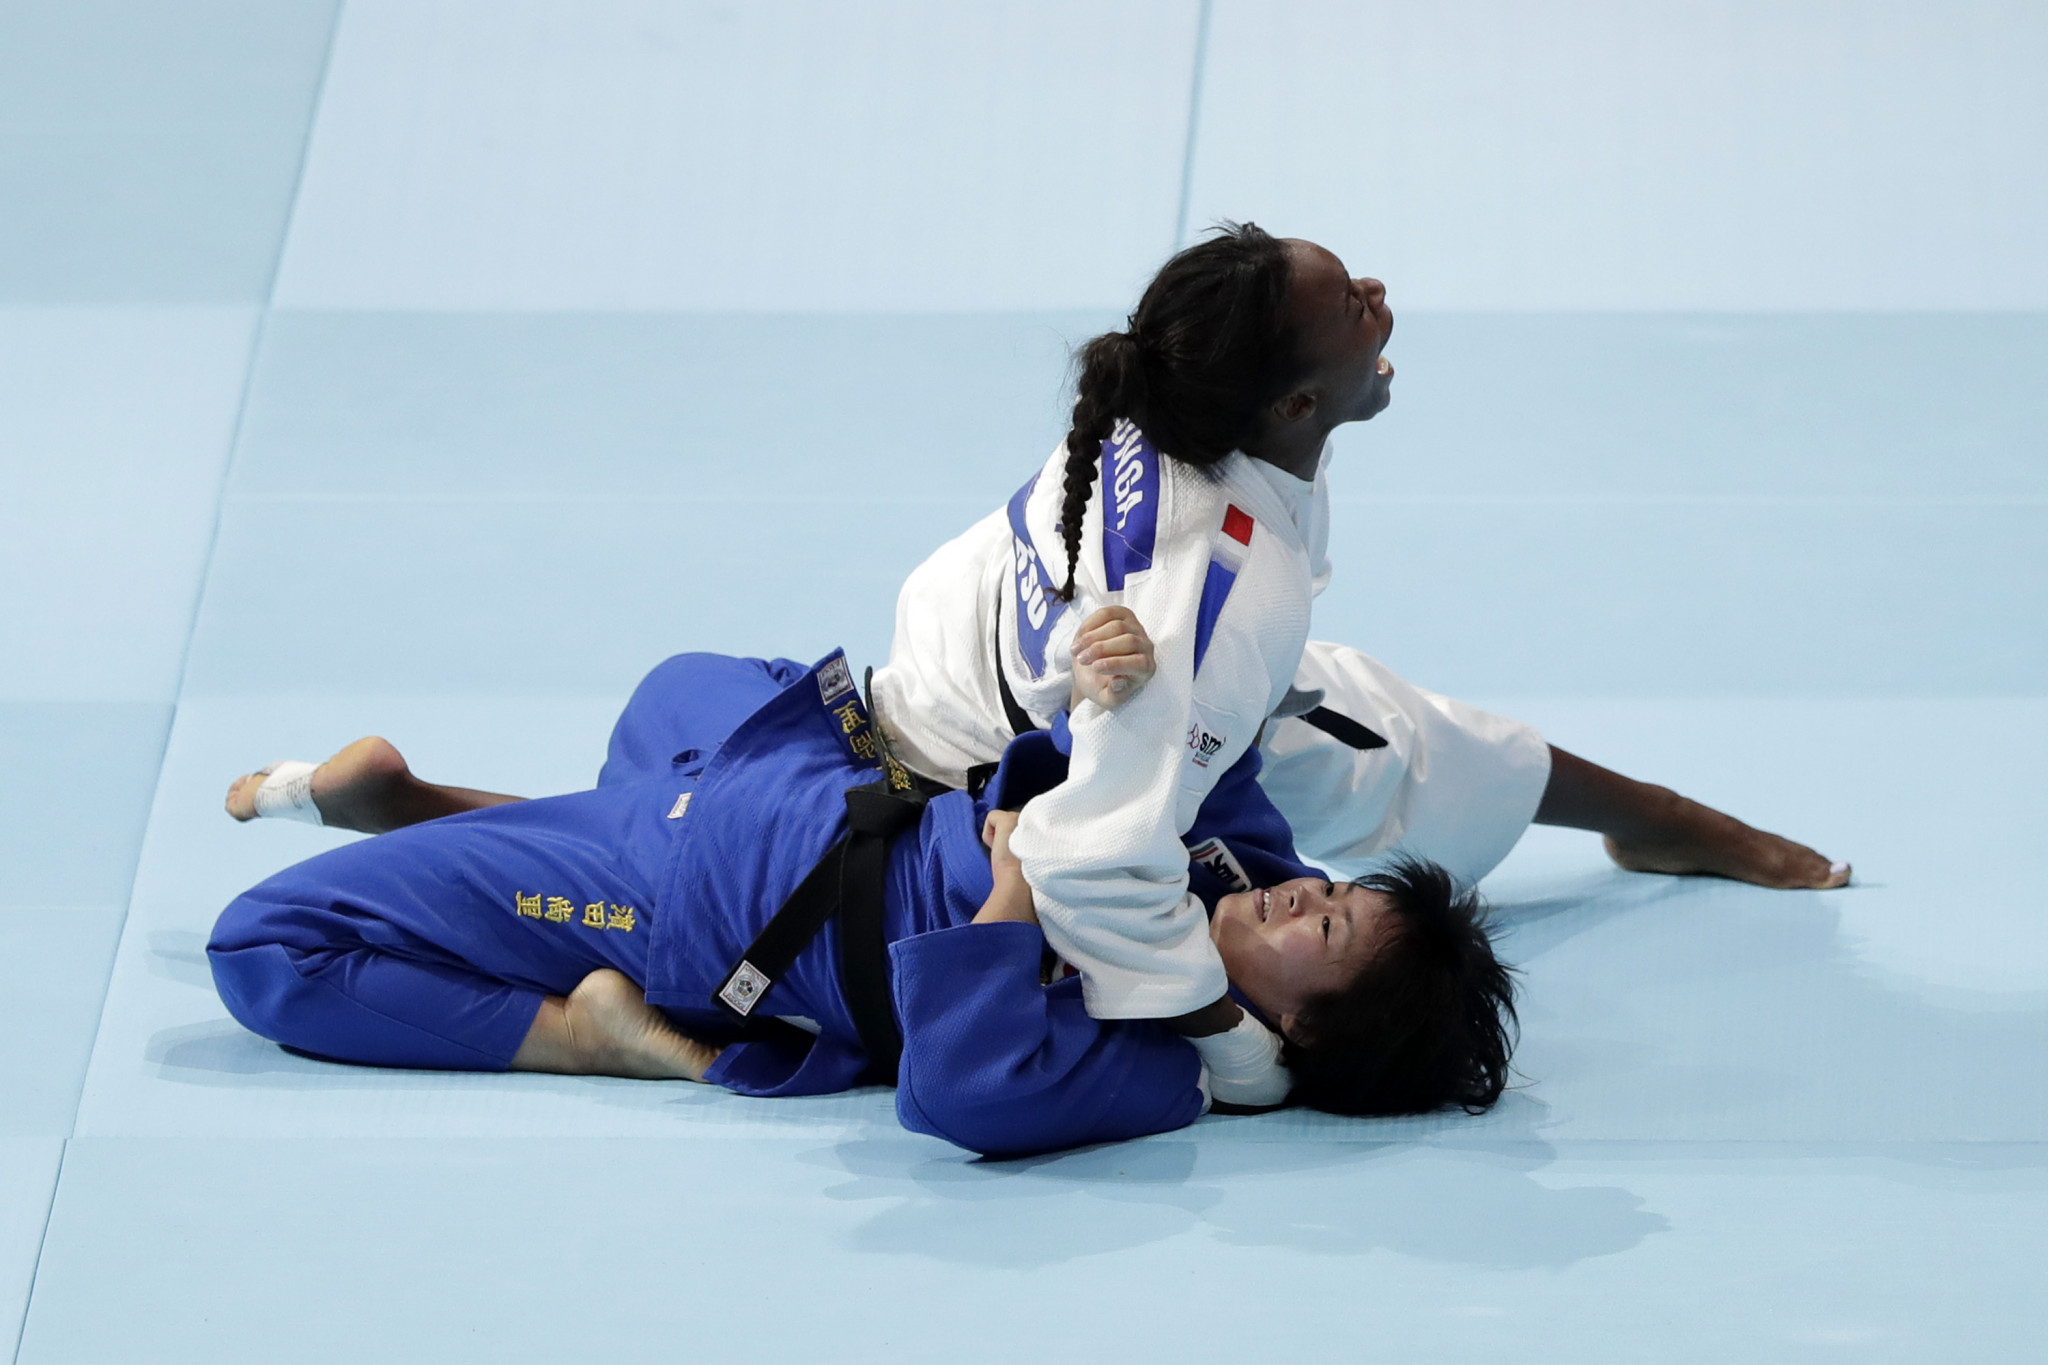 Antalya set to host biggest World Judo Tour event of the year